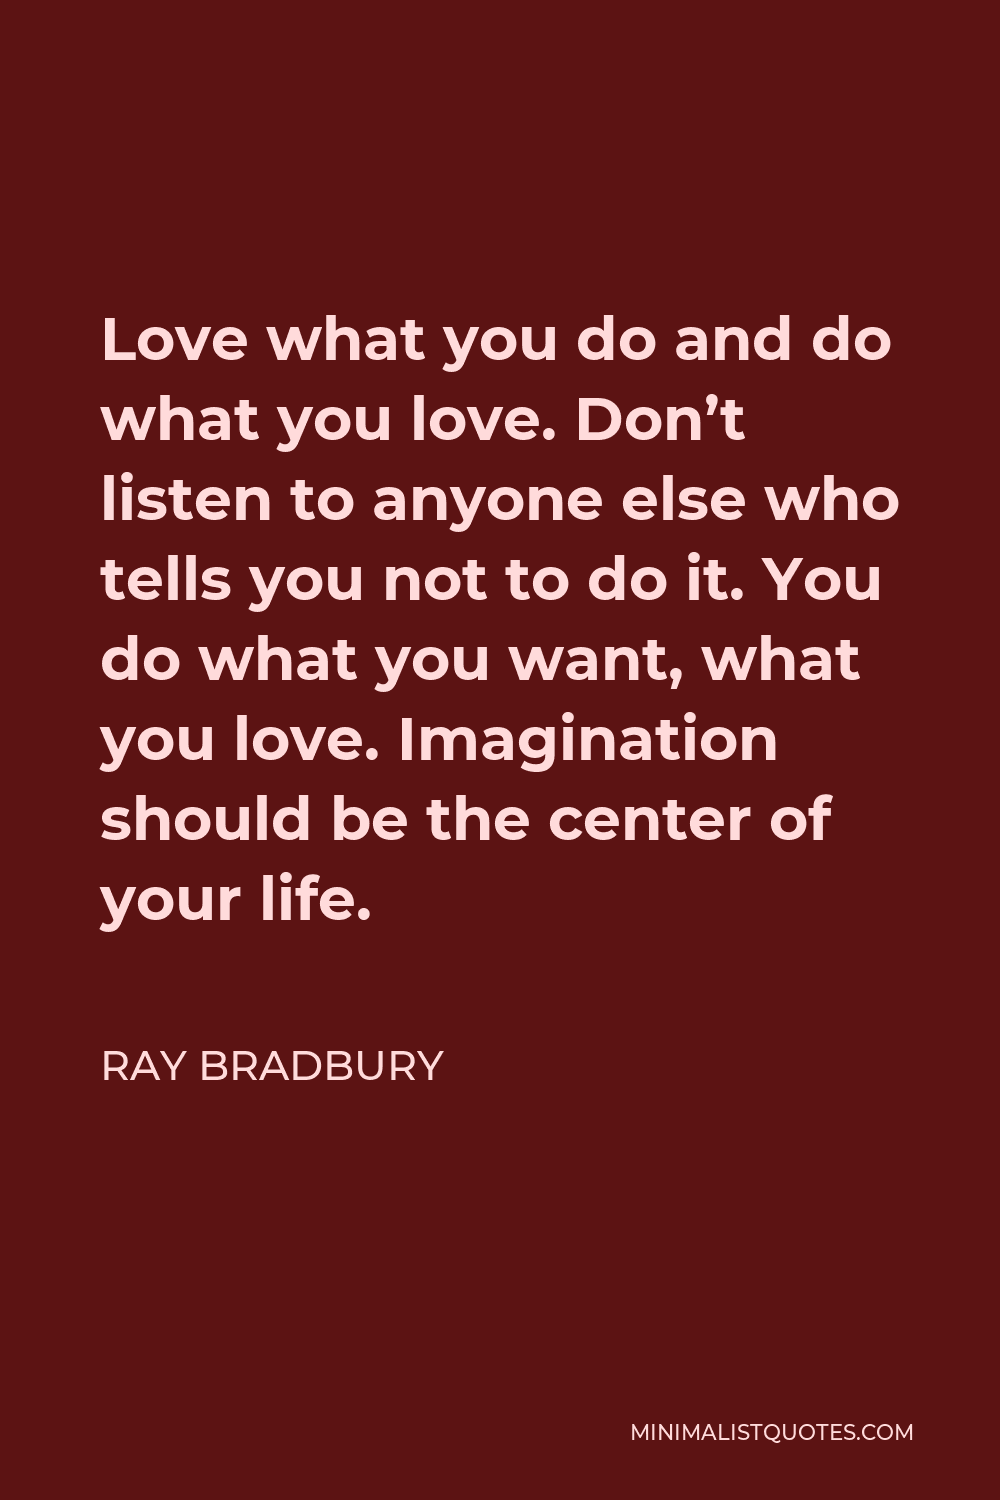 Ray Bradbury Quote - Love what you do and do what you love. Don’t listen to anyone else who tells you not to do it. You do what you want, what you love. Imagination should be the center of your life.